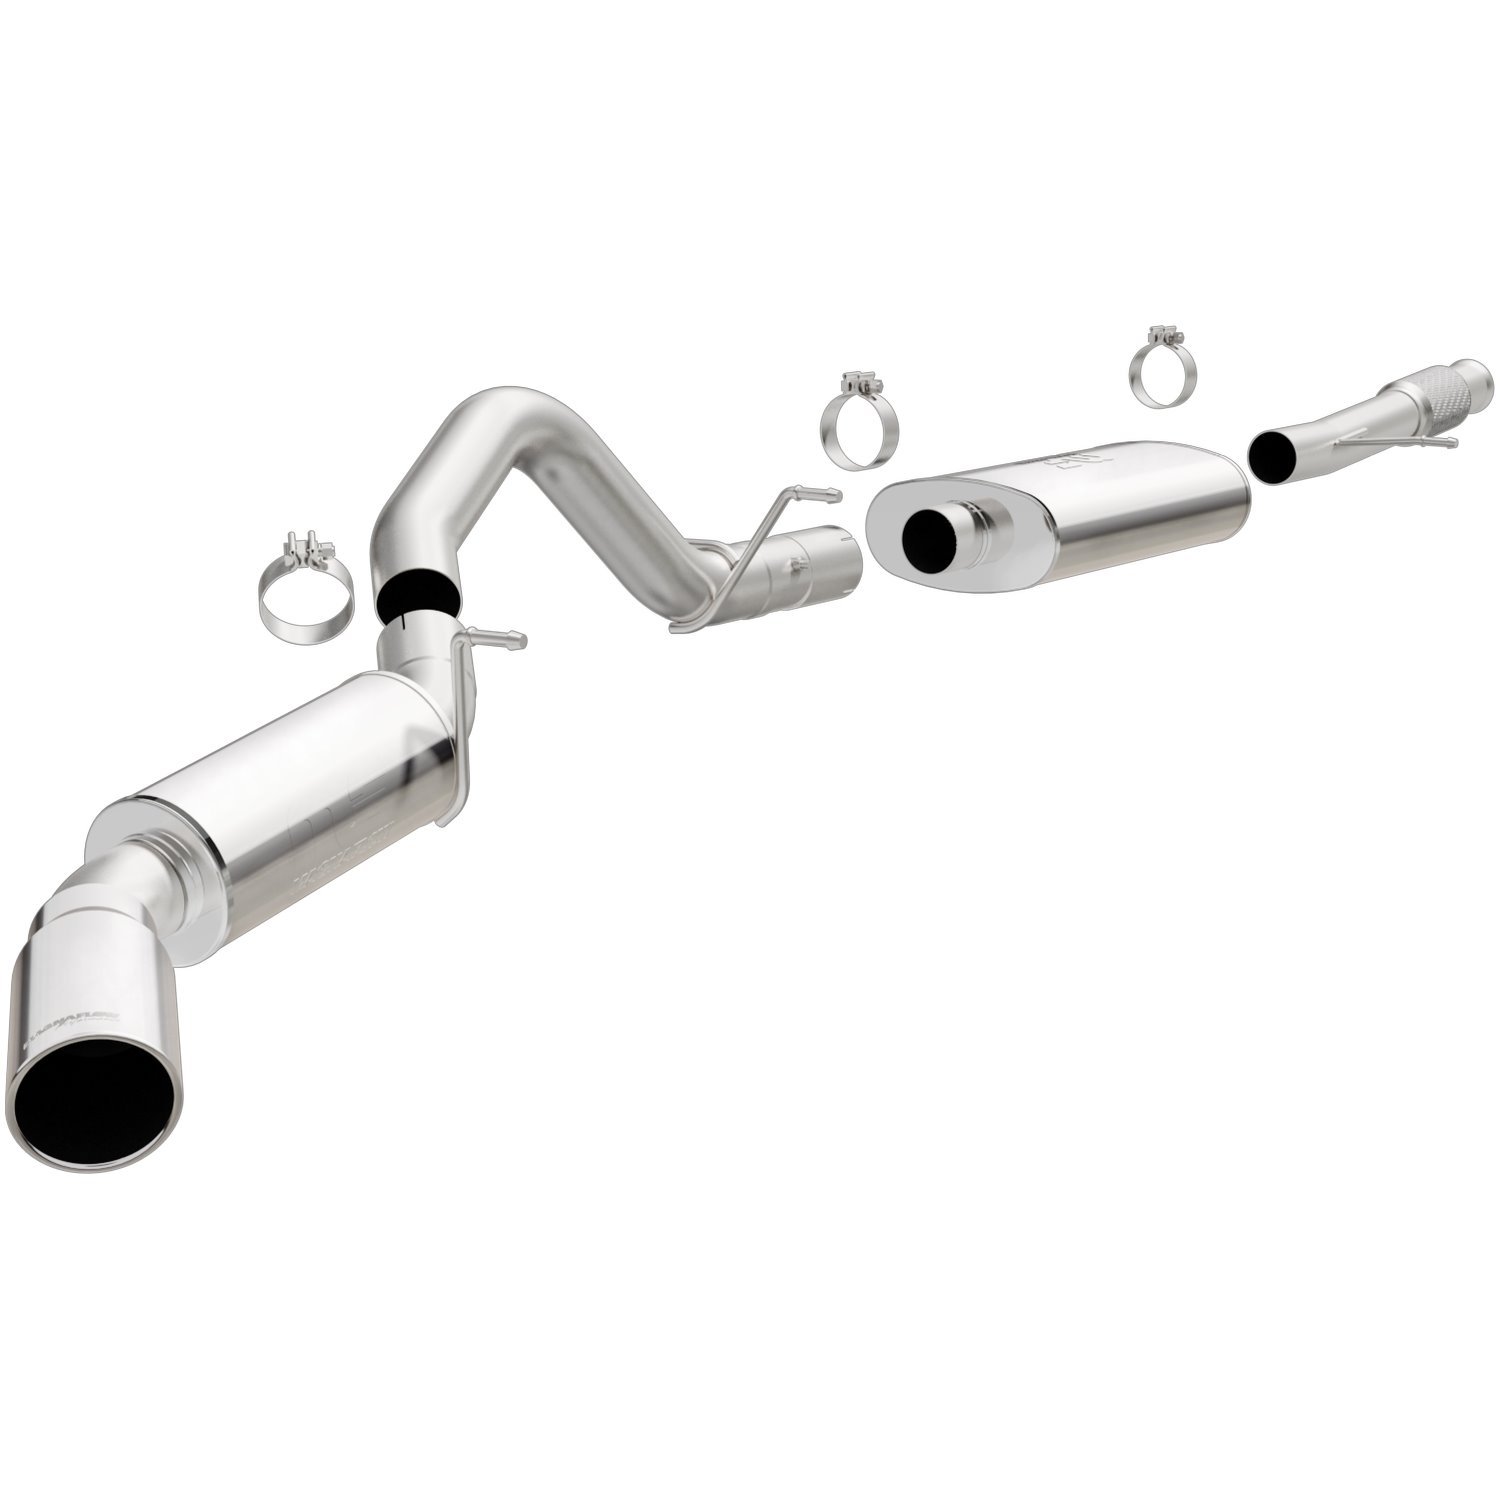 MF Series Cat-Back Exhaust System 2015-2019 Chevy Suburban,